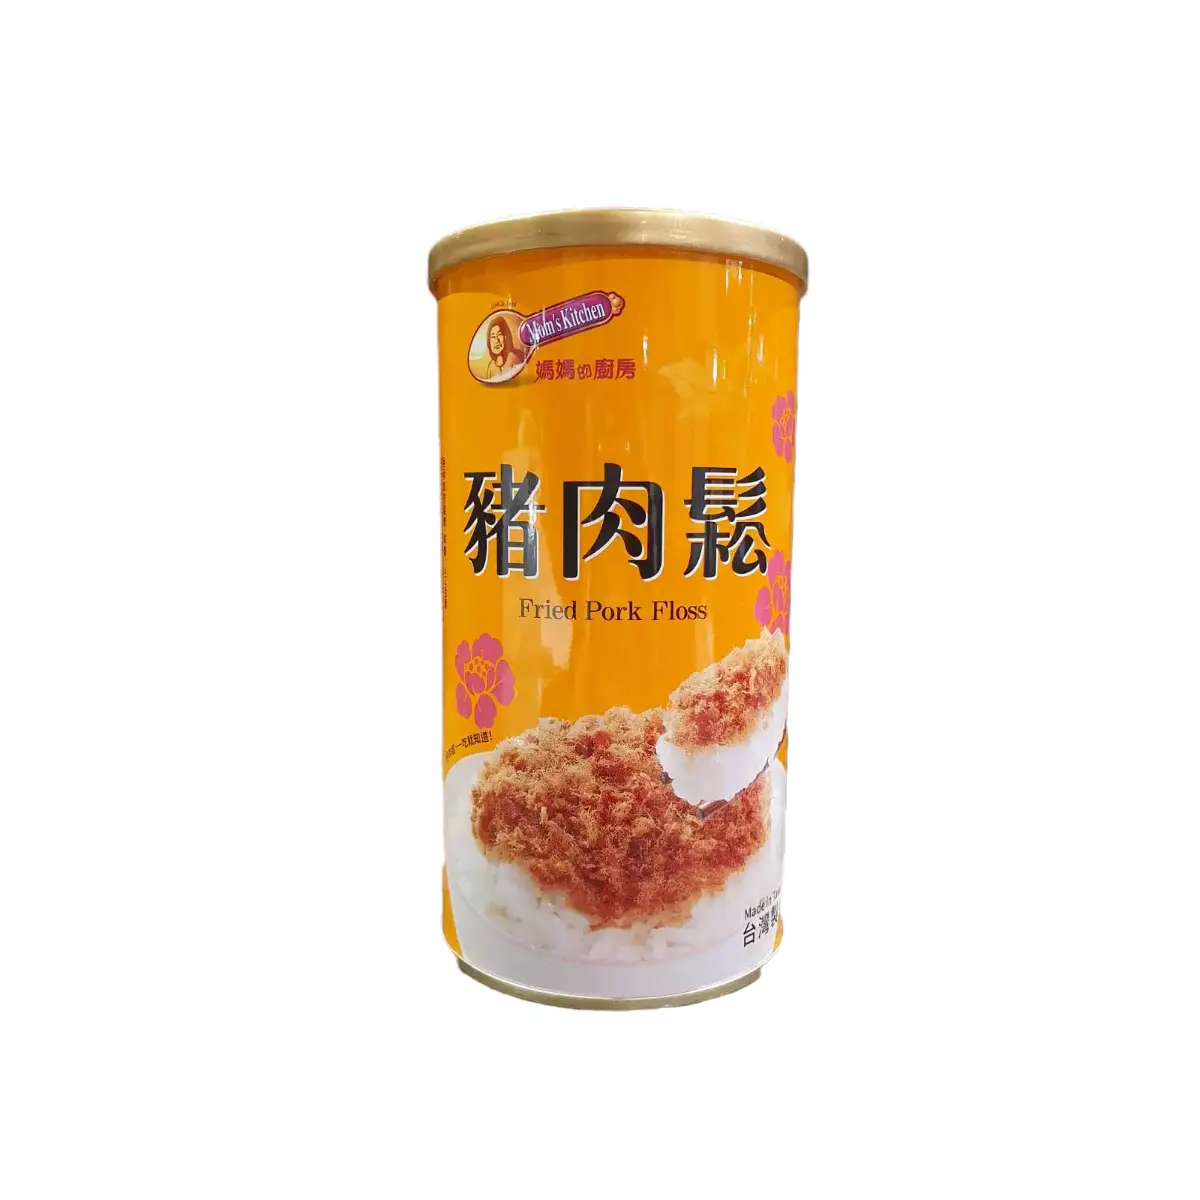 Mom's Kitchen Fried Pork Floss 200g - Buy Asian Pantry Products Online /  Buy Asian Dried Food Onli